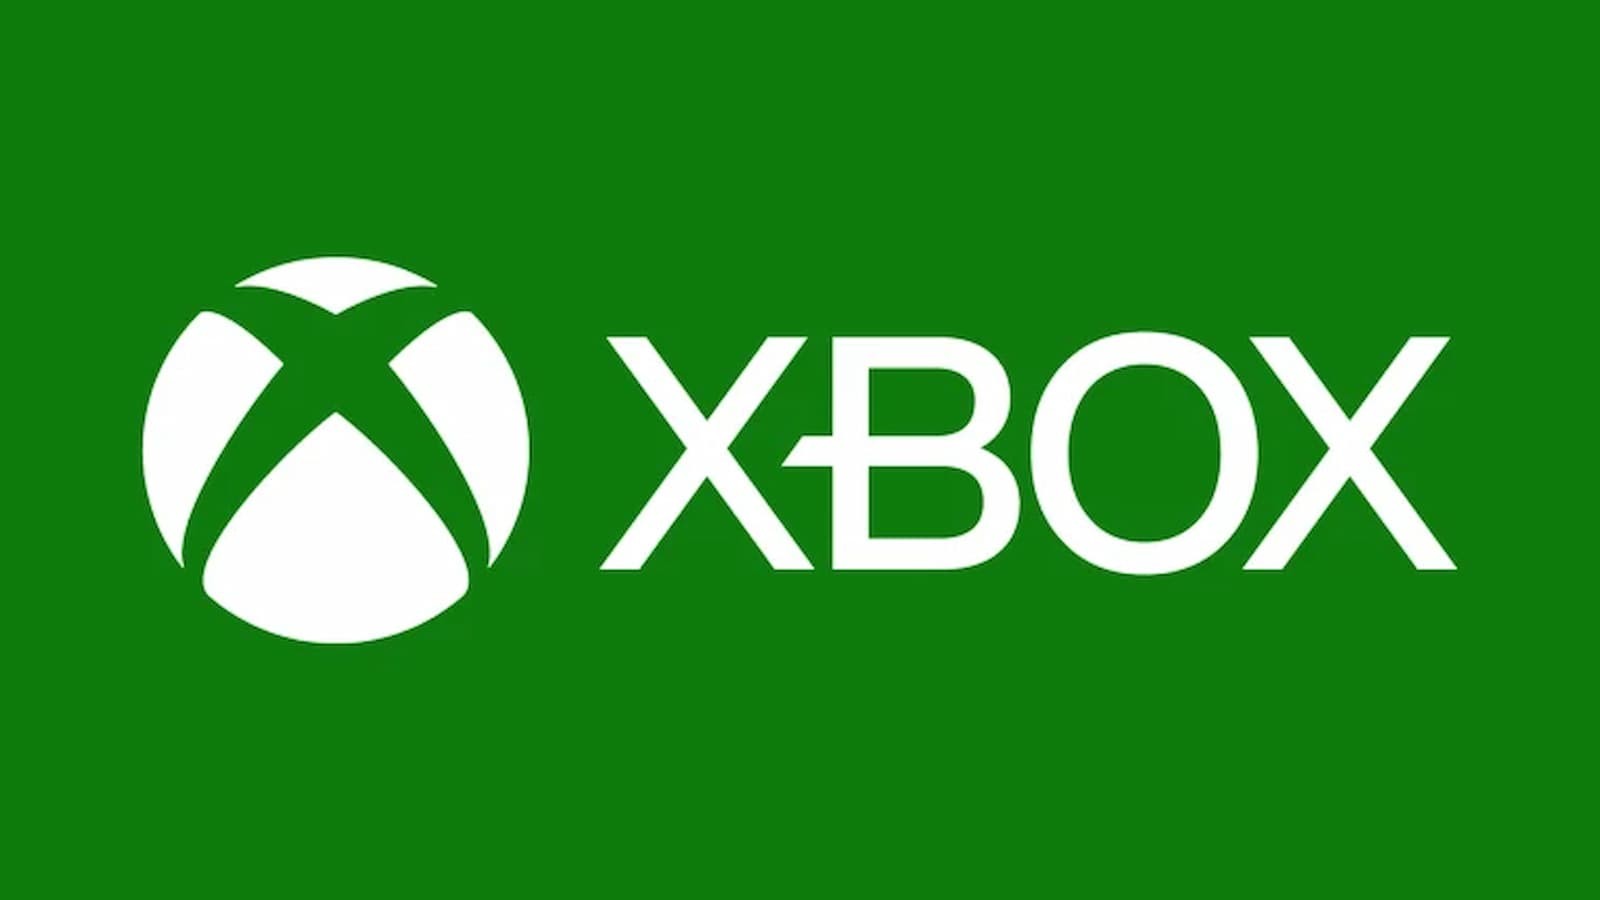 Many lament Xbox's recent acquisition spree as the potential reason behind today's studio closures.